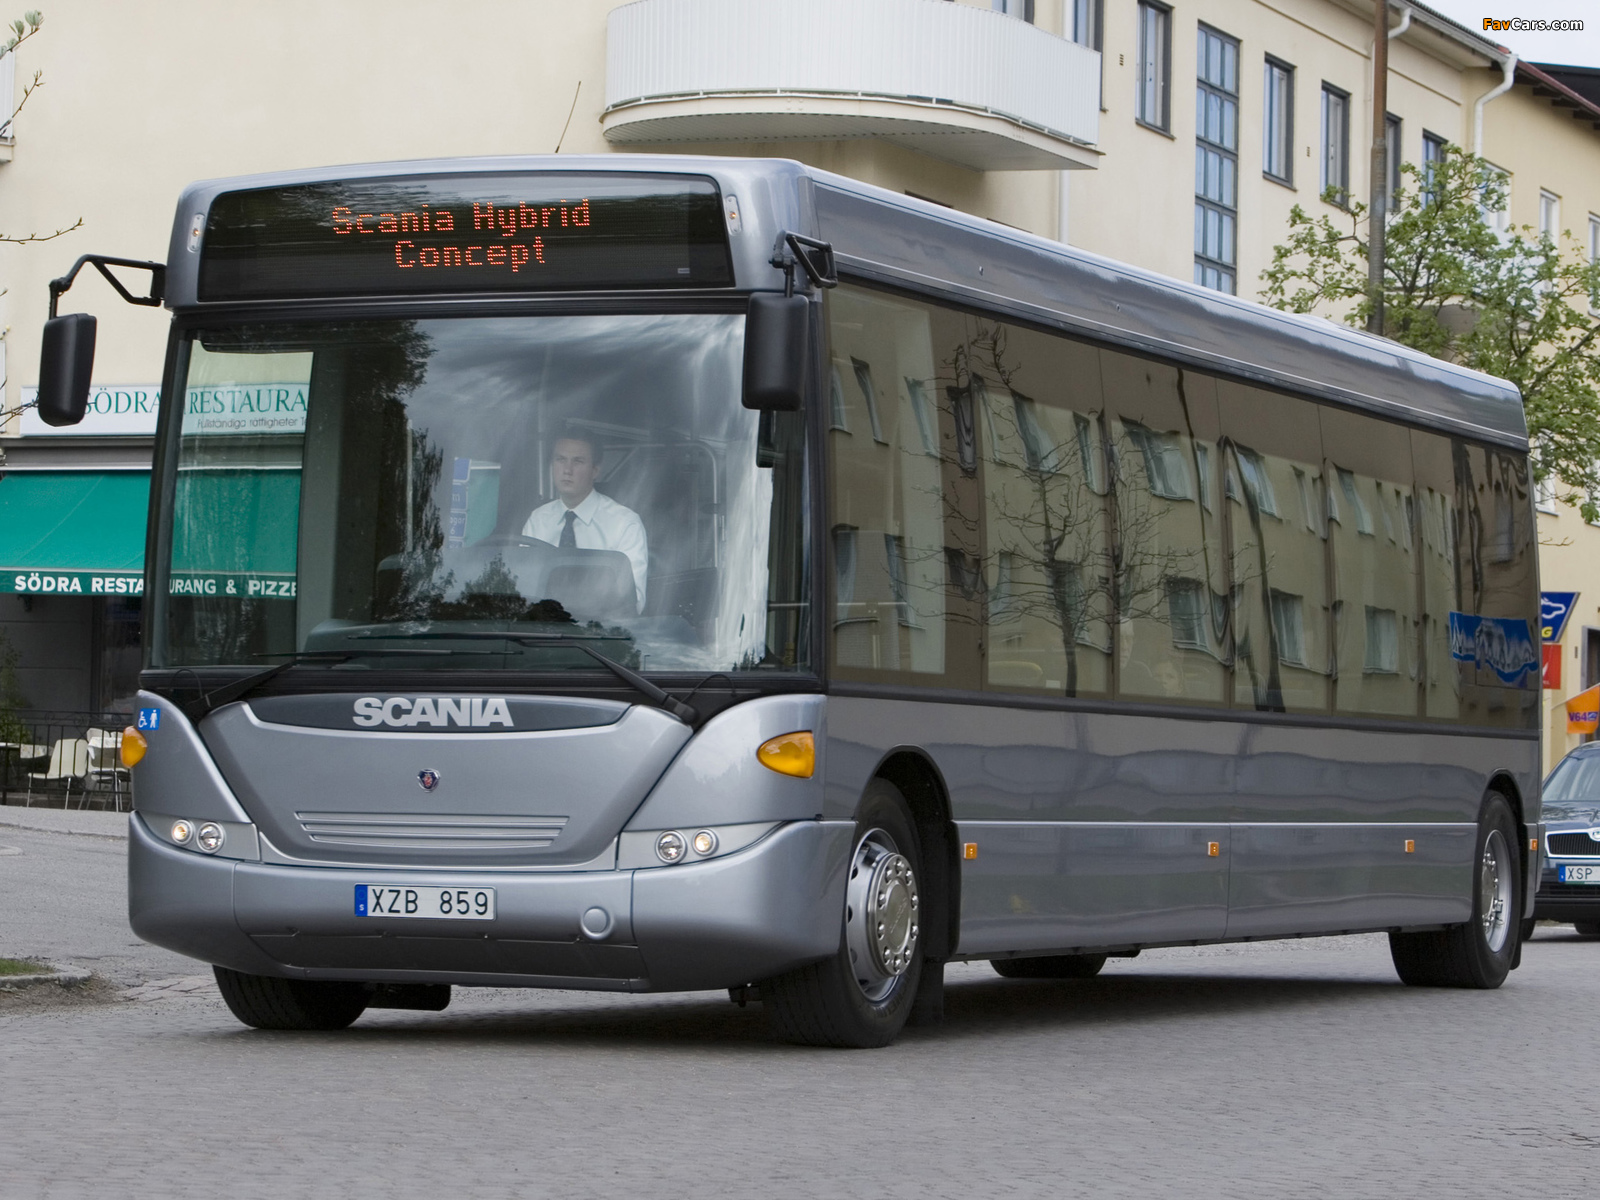 Scania Hybrid Concept Bus 2007 pictures (1600 x 1200)